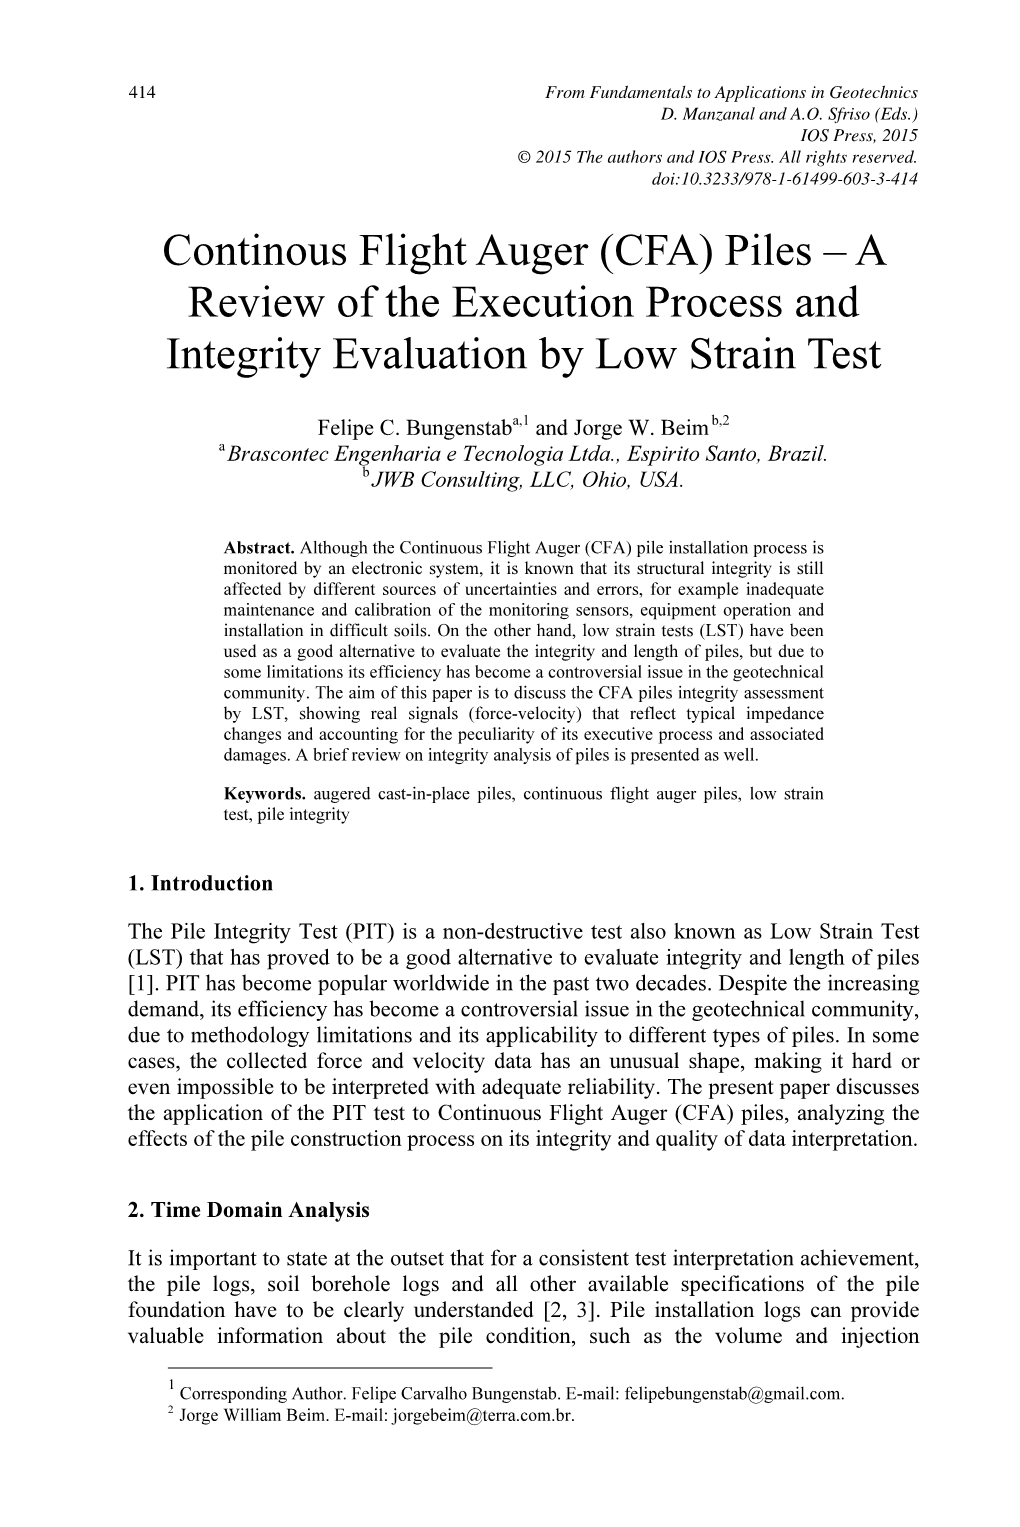 Continuous Flight Auger (CFA) Piles – a Review of the Execution Process